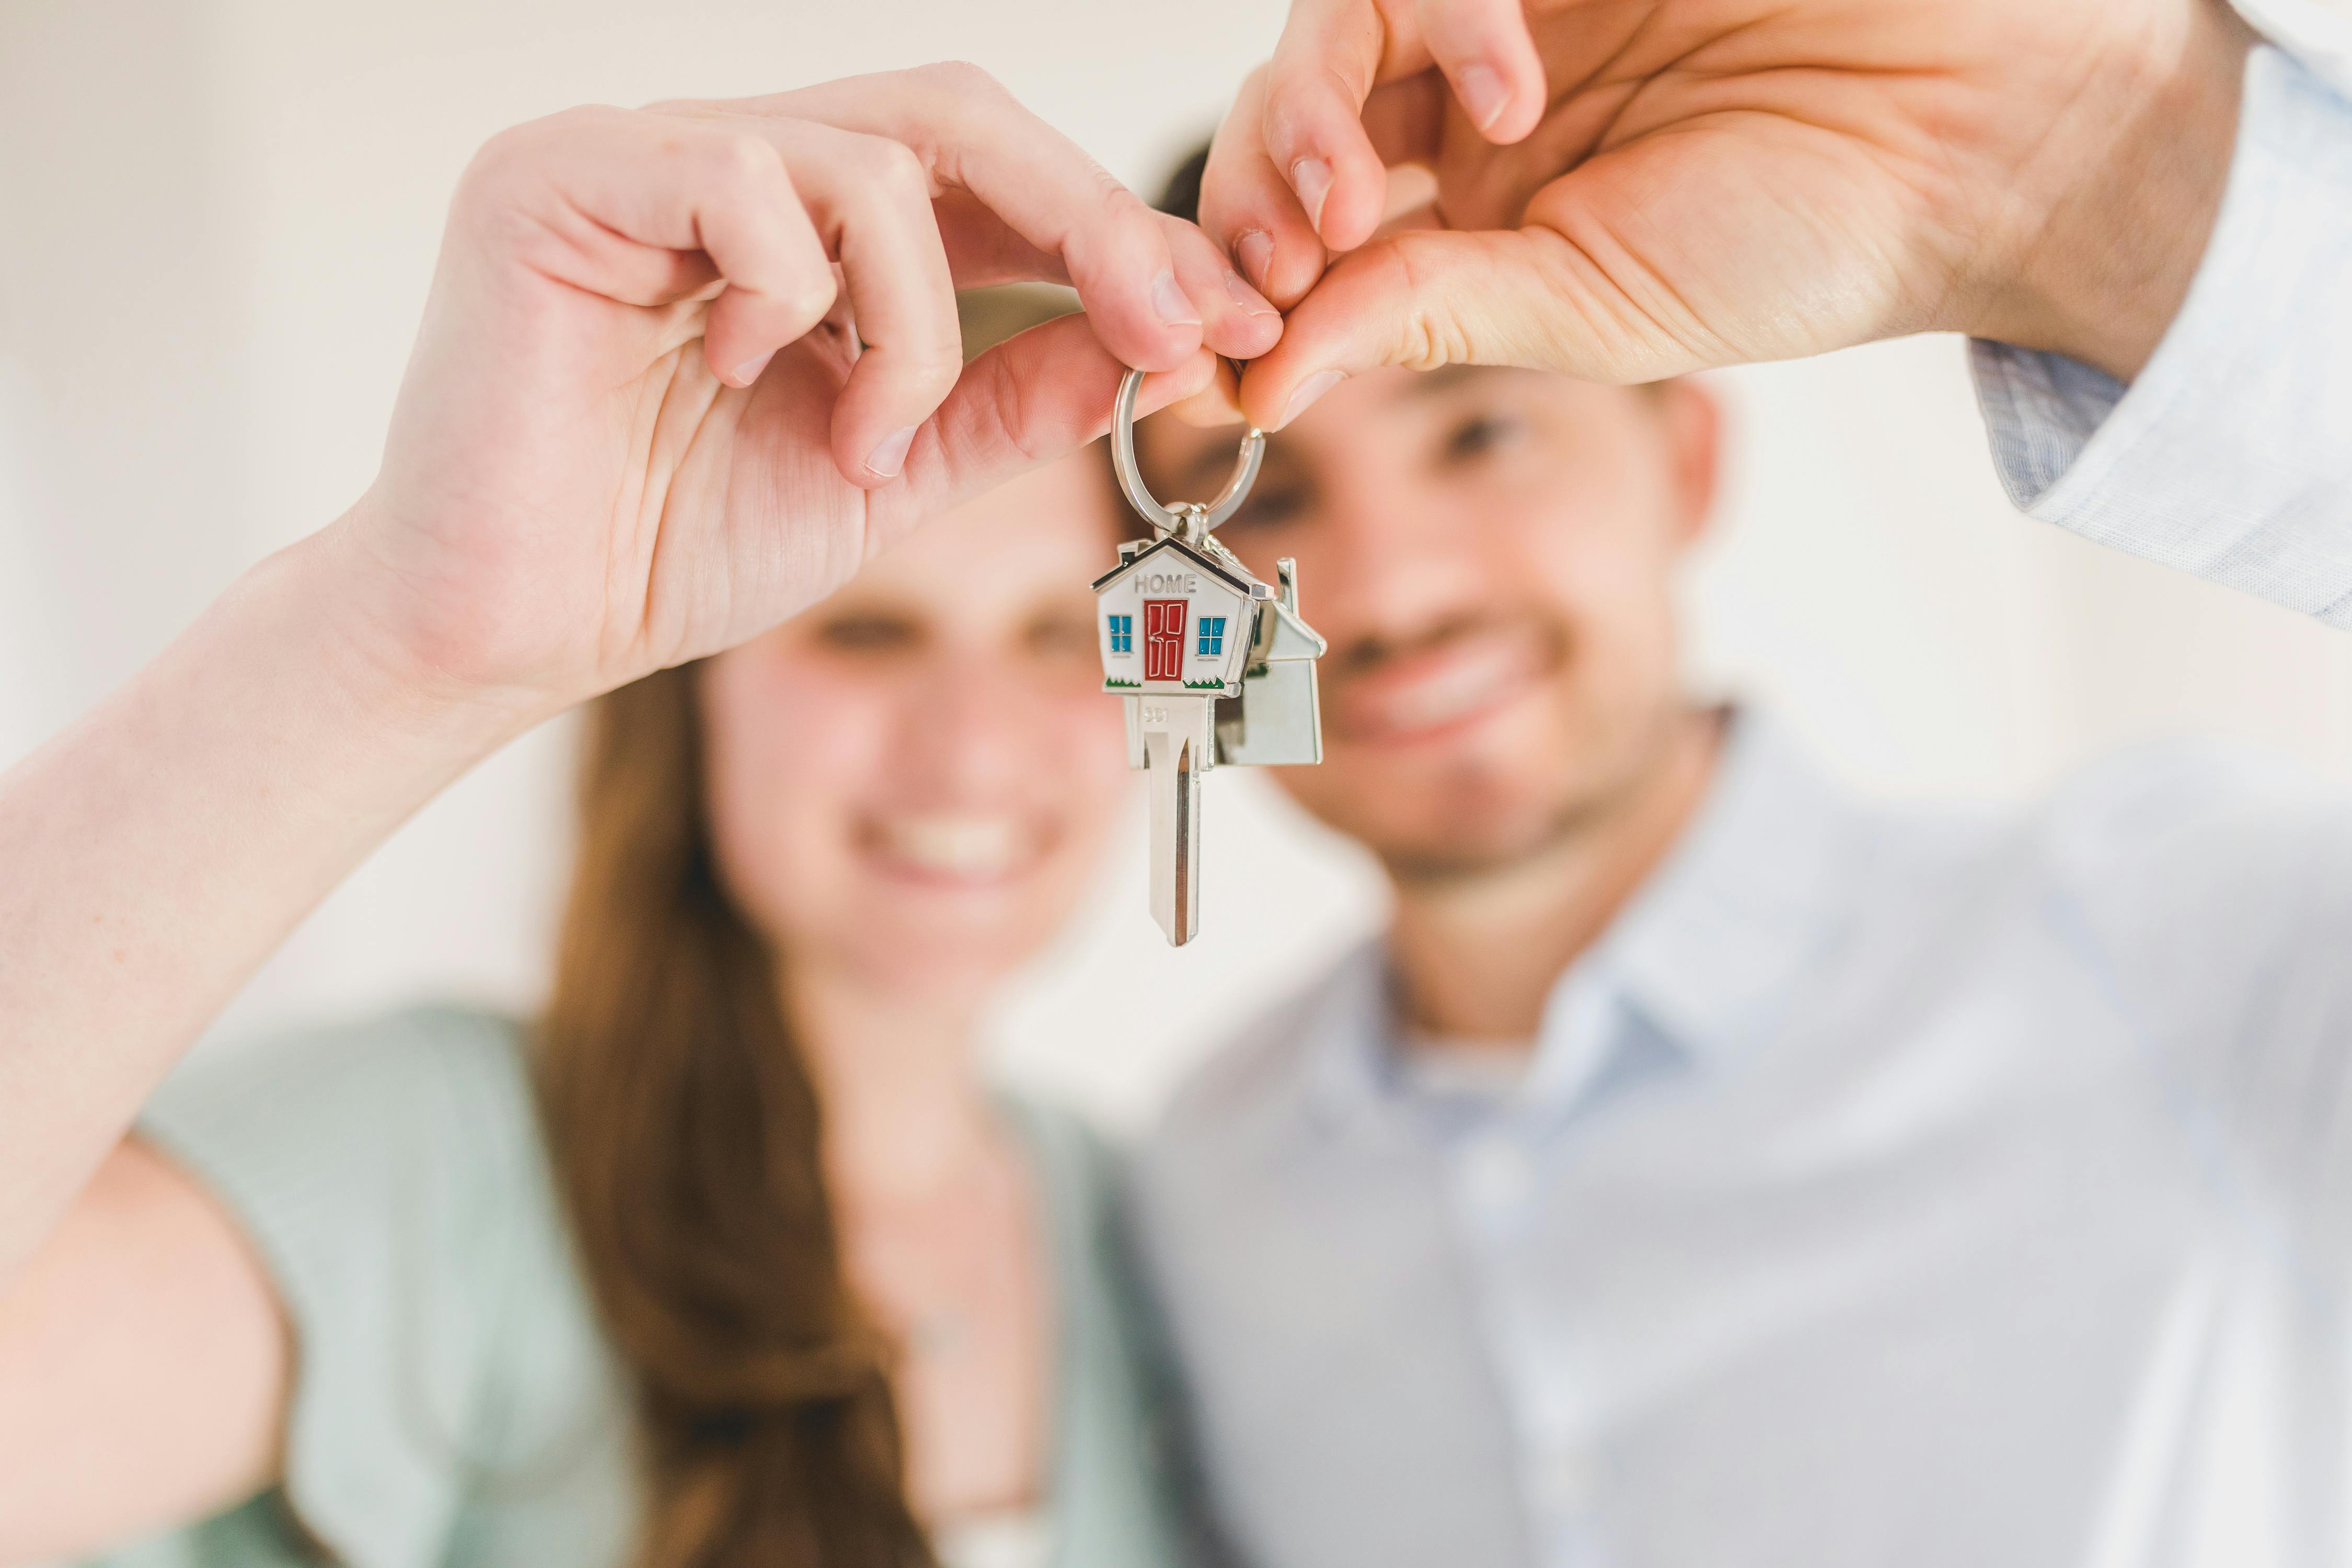 Getting ready to purchase your first home